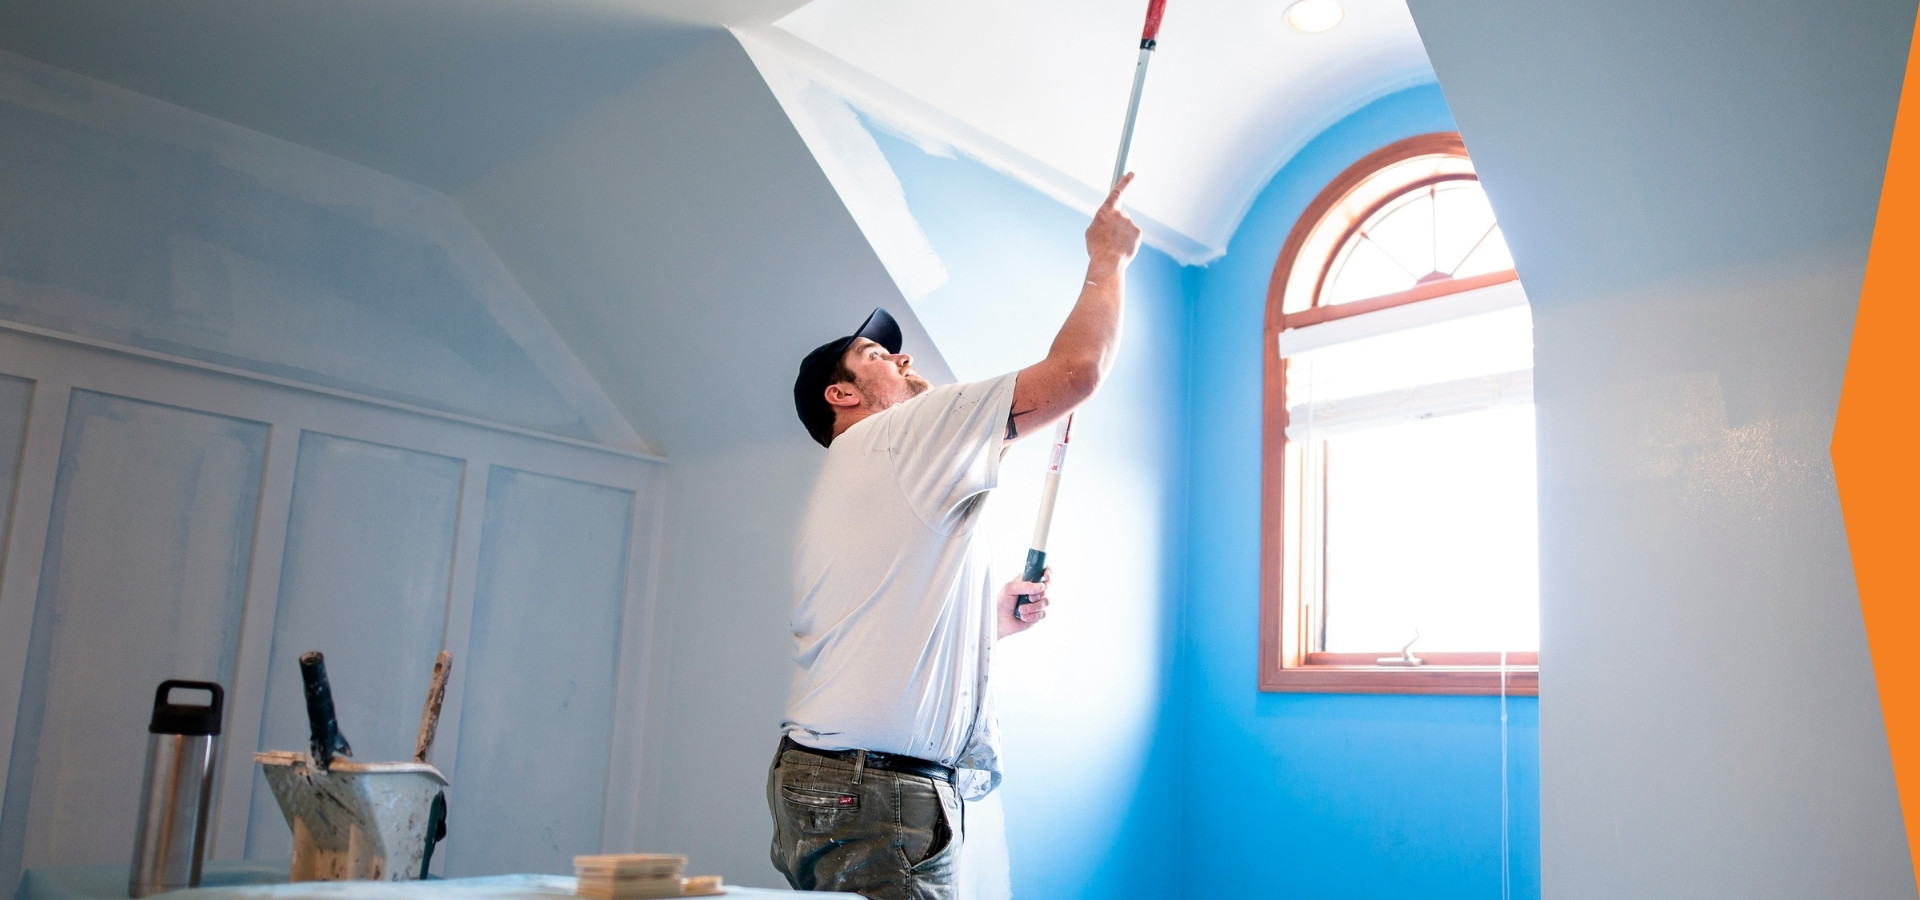 Supreme Handyman Painting a Ceiling